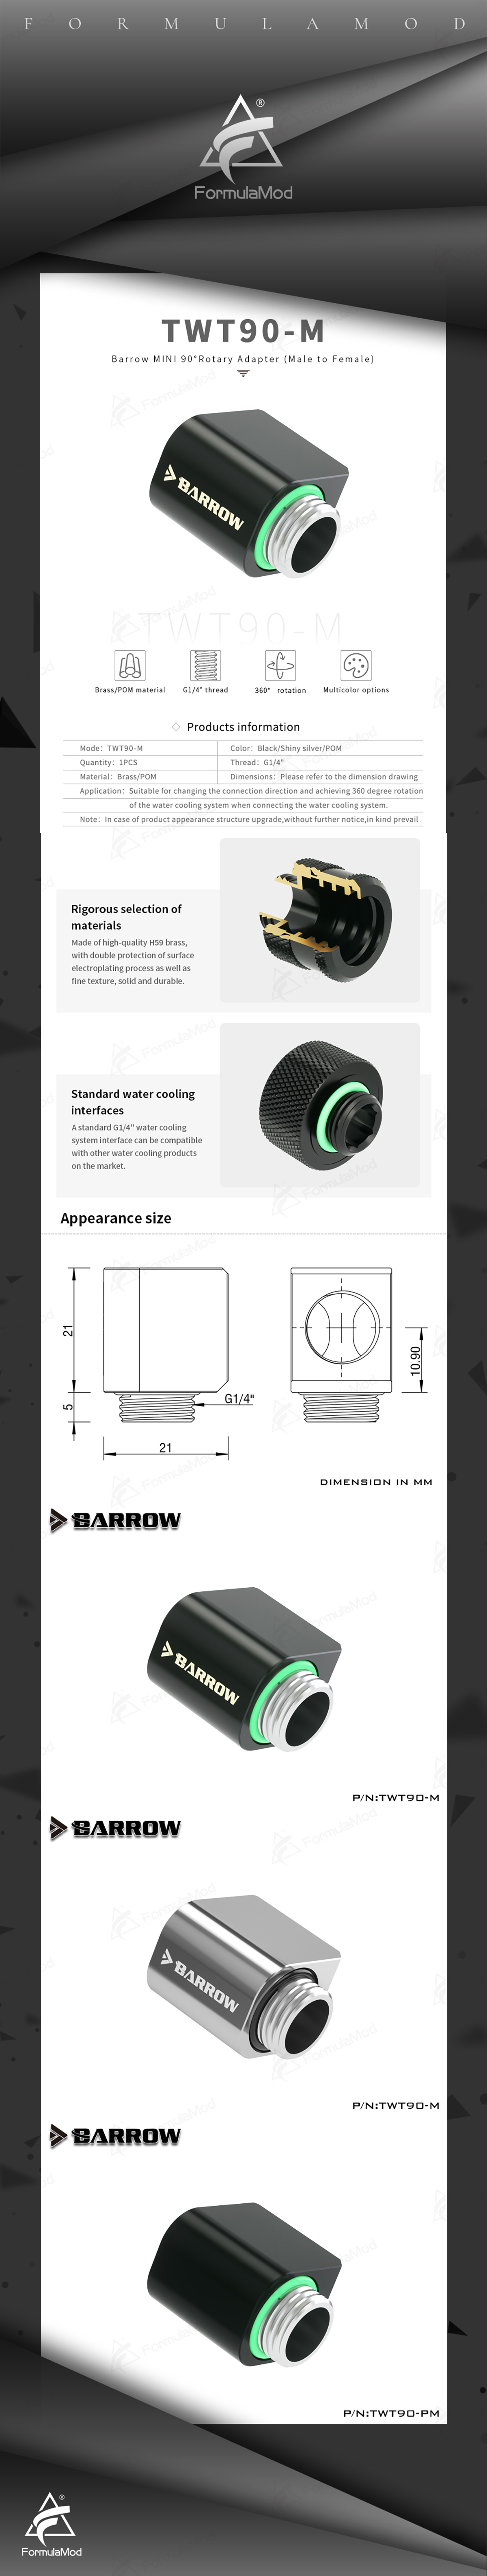 Barrow MINI 90 Degree Rotating Adapter, 21MM Adapter Fitting, Water Cooling Tube Angled Fitting, TWT90-M  